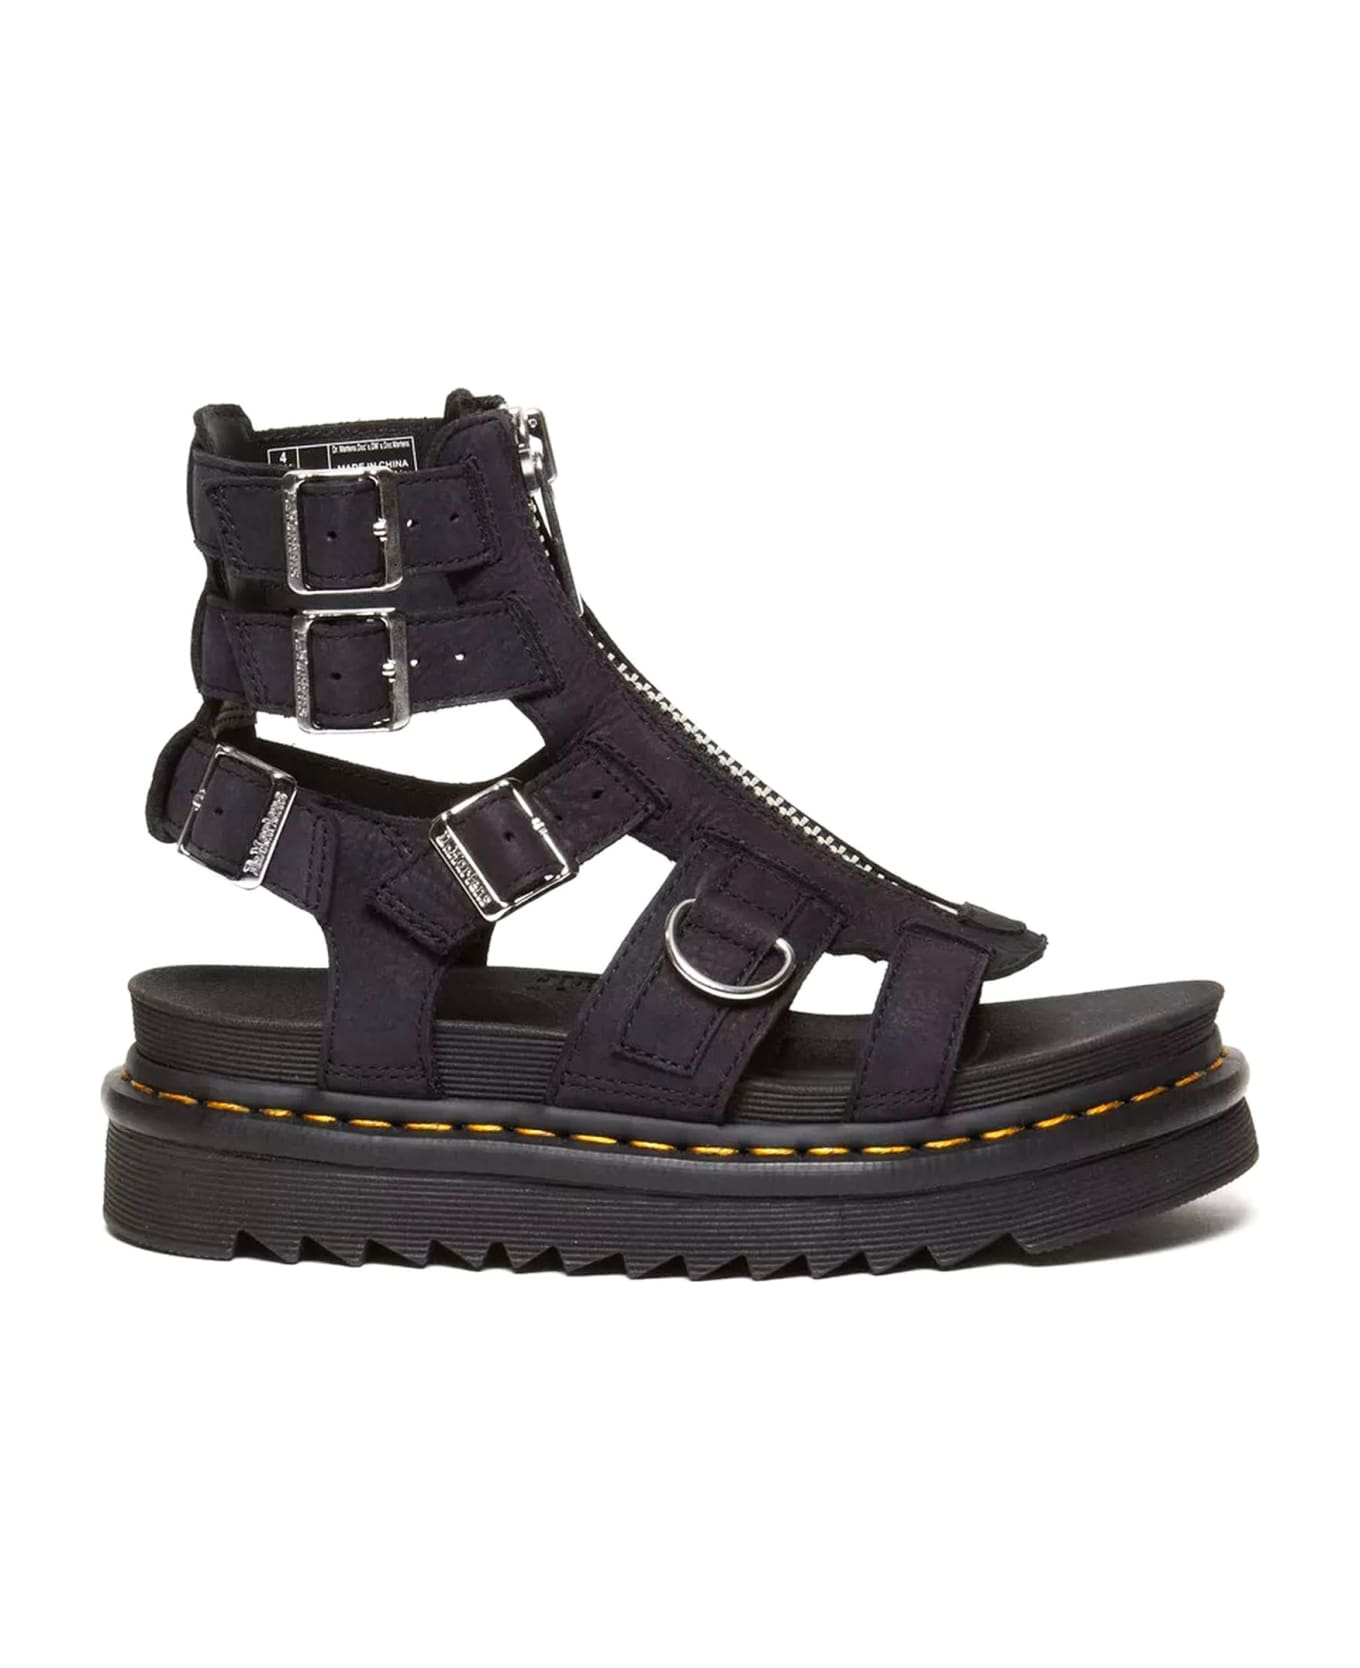 Dr. Martens Olson Sandals In Charcoal Grey Tumbled Nubuck - Black